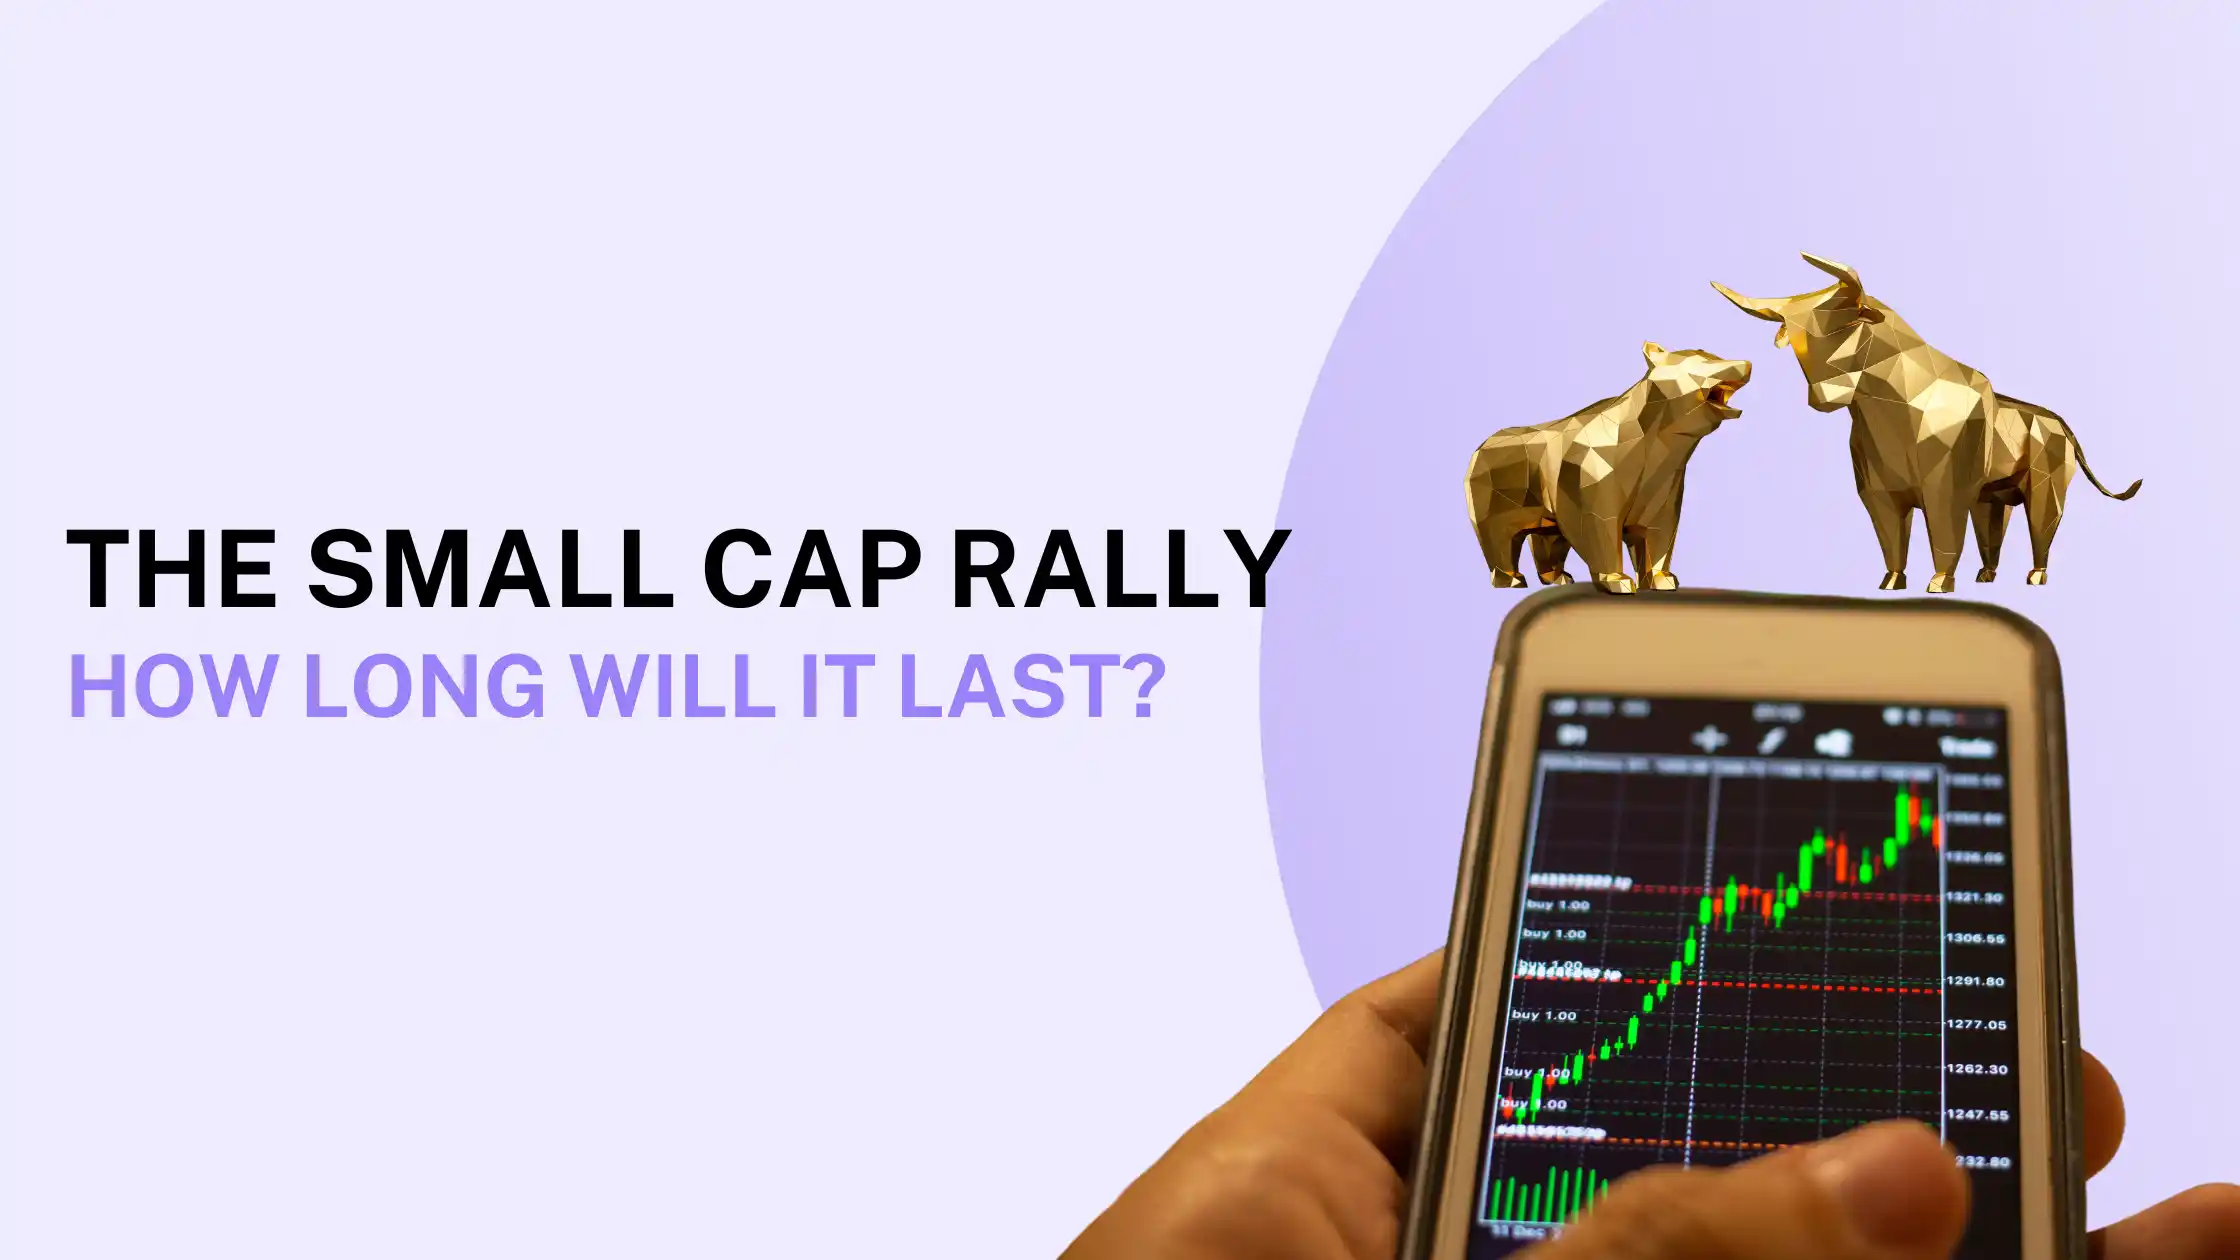 The Small Cap Rally - Is it Time For a Correction?